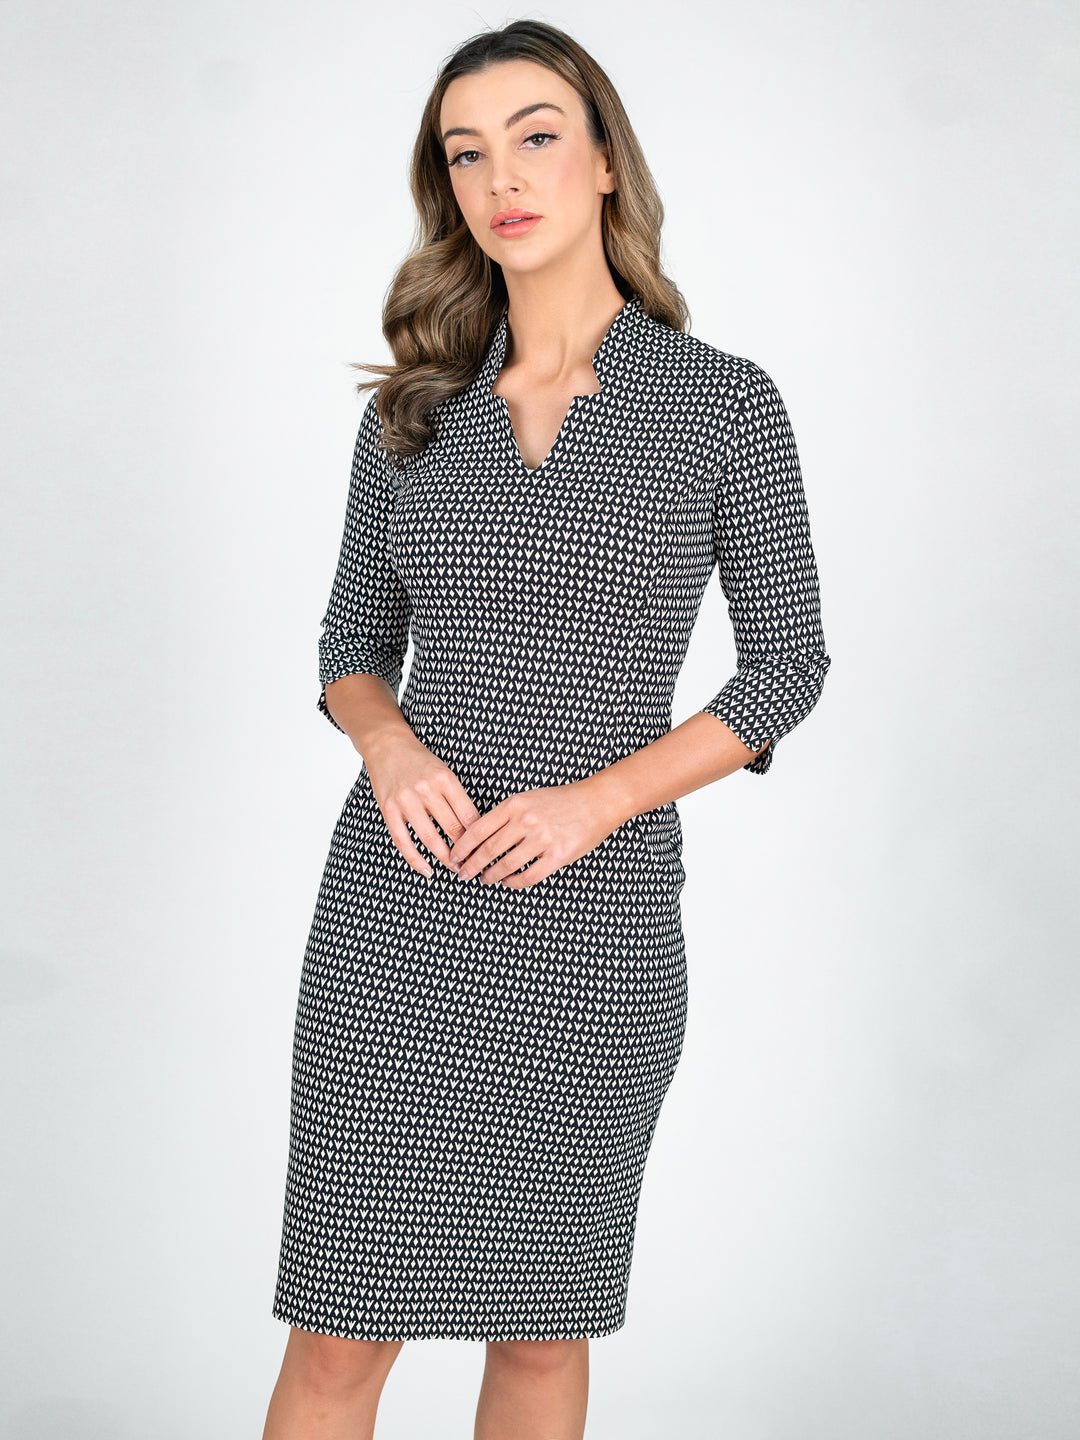 BEWITCHED 3/4 Sleeve Suit Dress